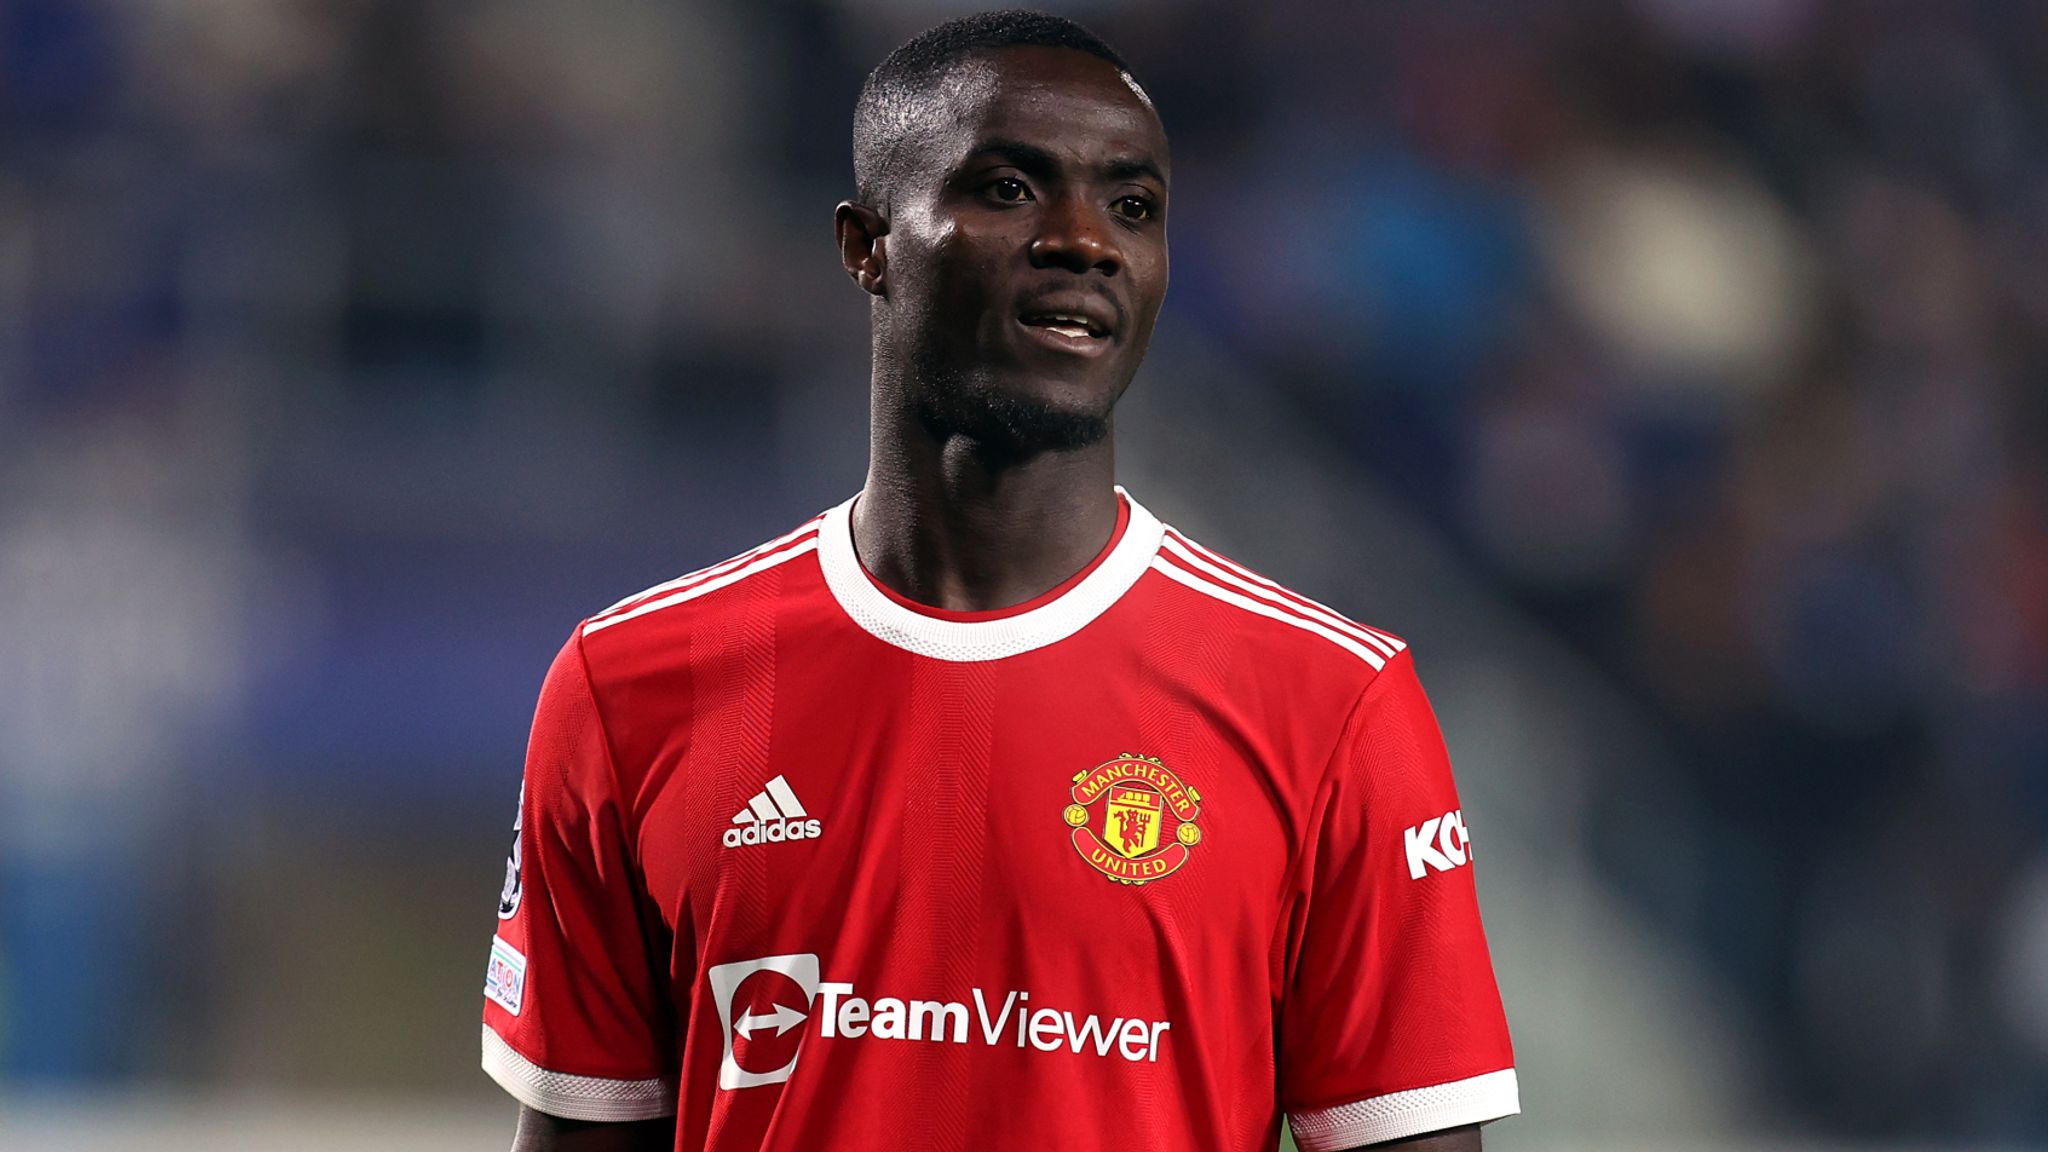 Eric Bailly Transfer News: Will Olympique de Marseille sign him permanently from Manchester United?